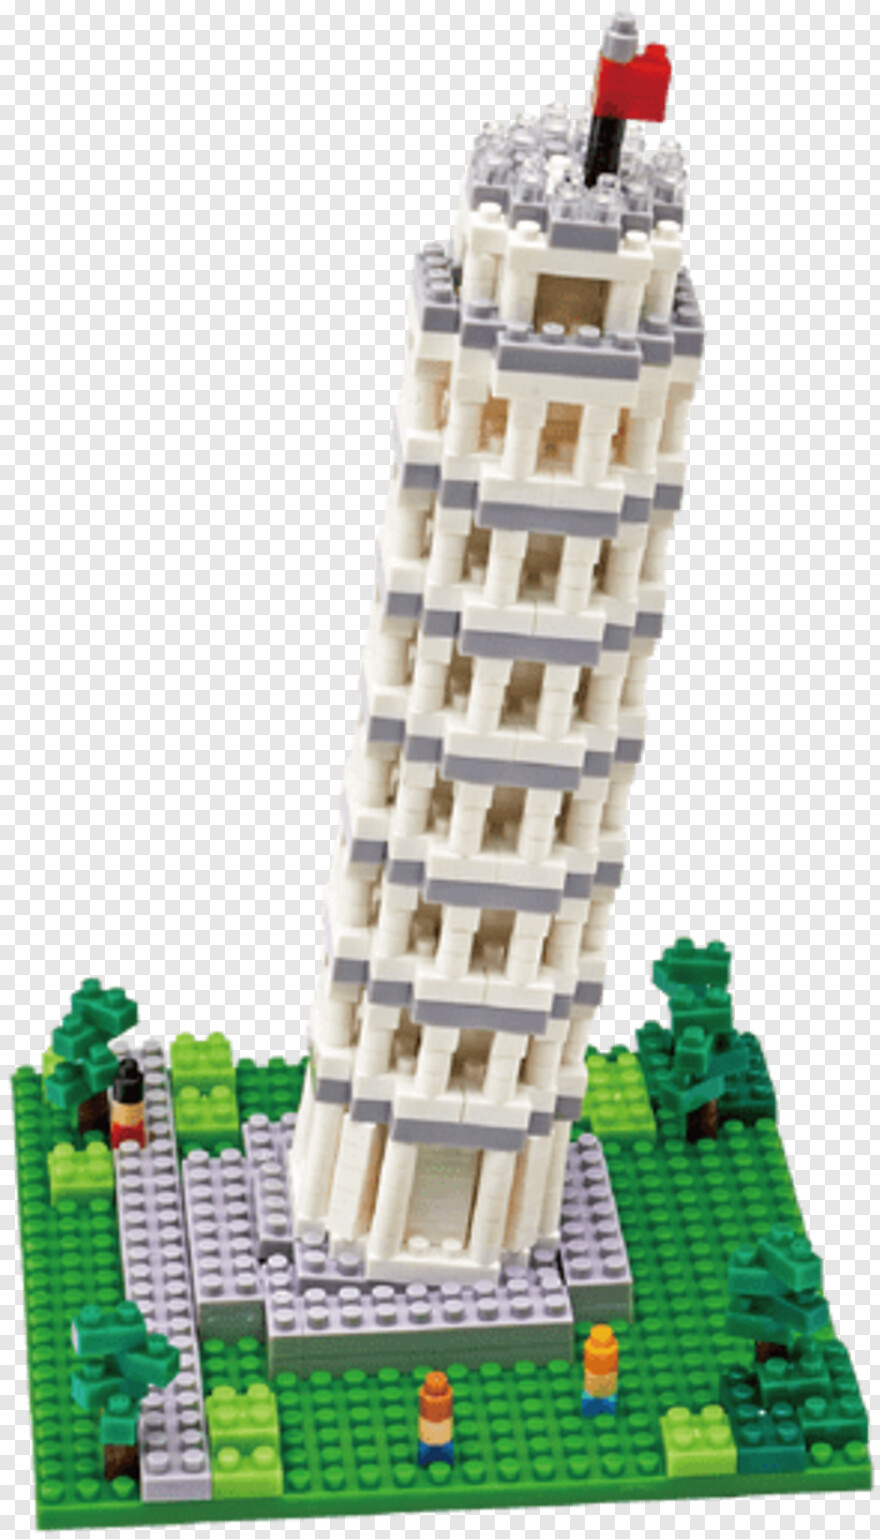 leaning-tower-of-pisa # 721628